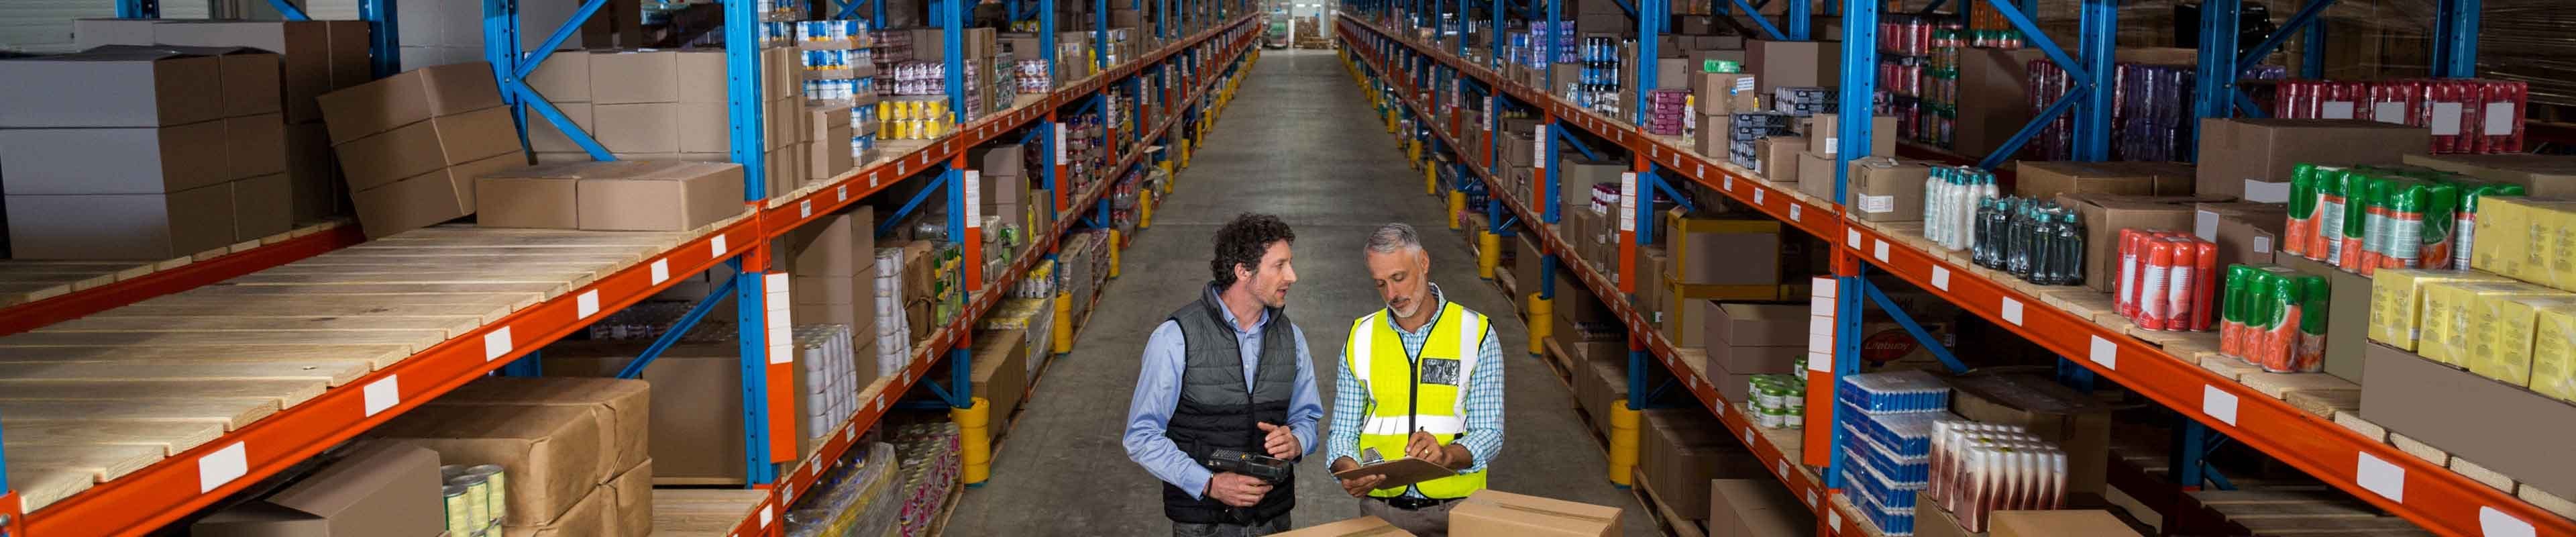 Image of a workplace incident and safety administrator interviewing an employee in a warehouse.